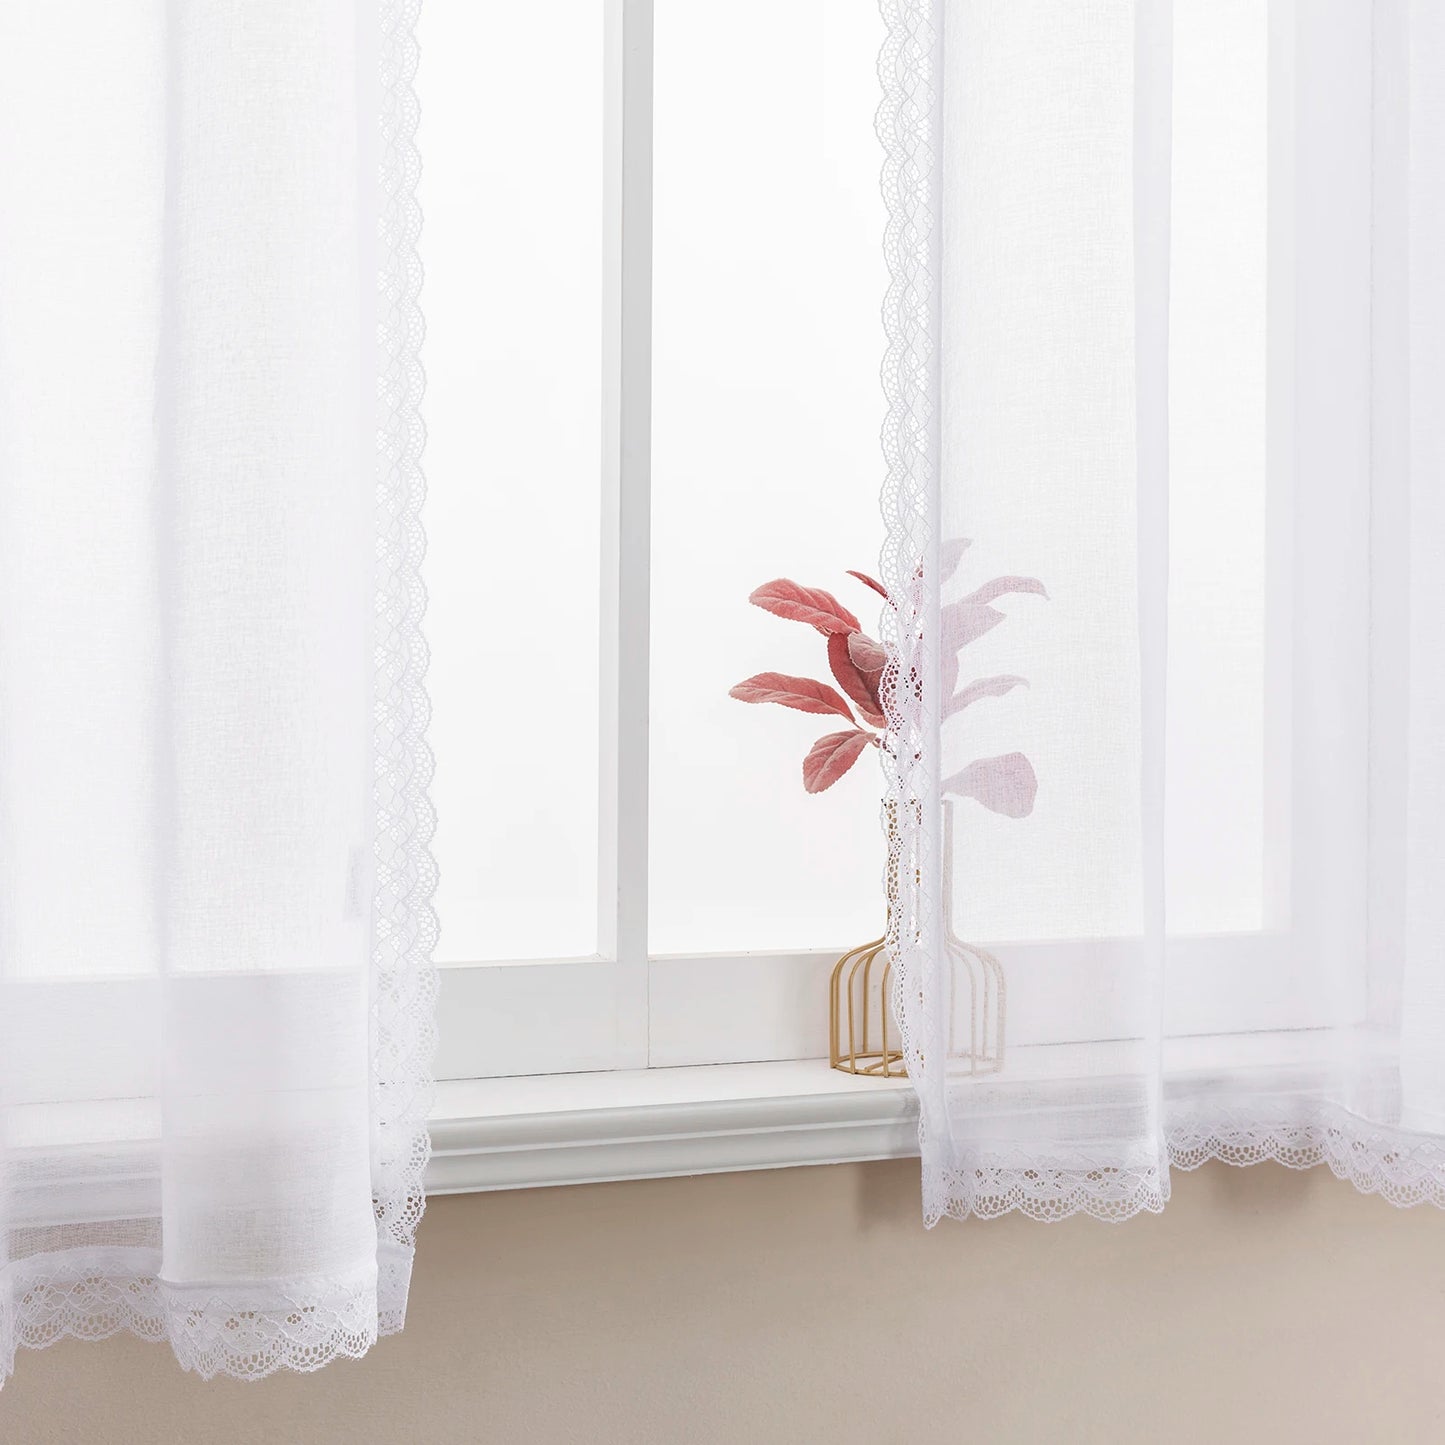 Embroidered Lace Sheer Valance Curtains: Elegant Window Dressing for Kitchen and Bedroom